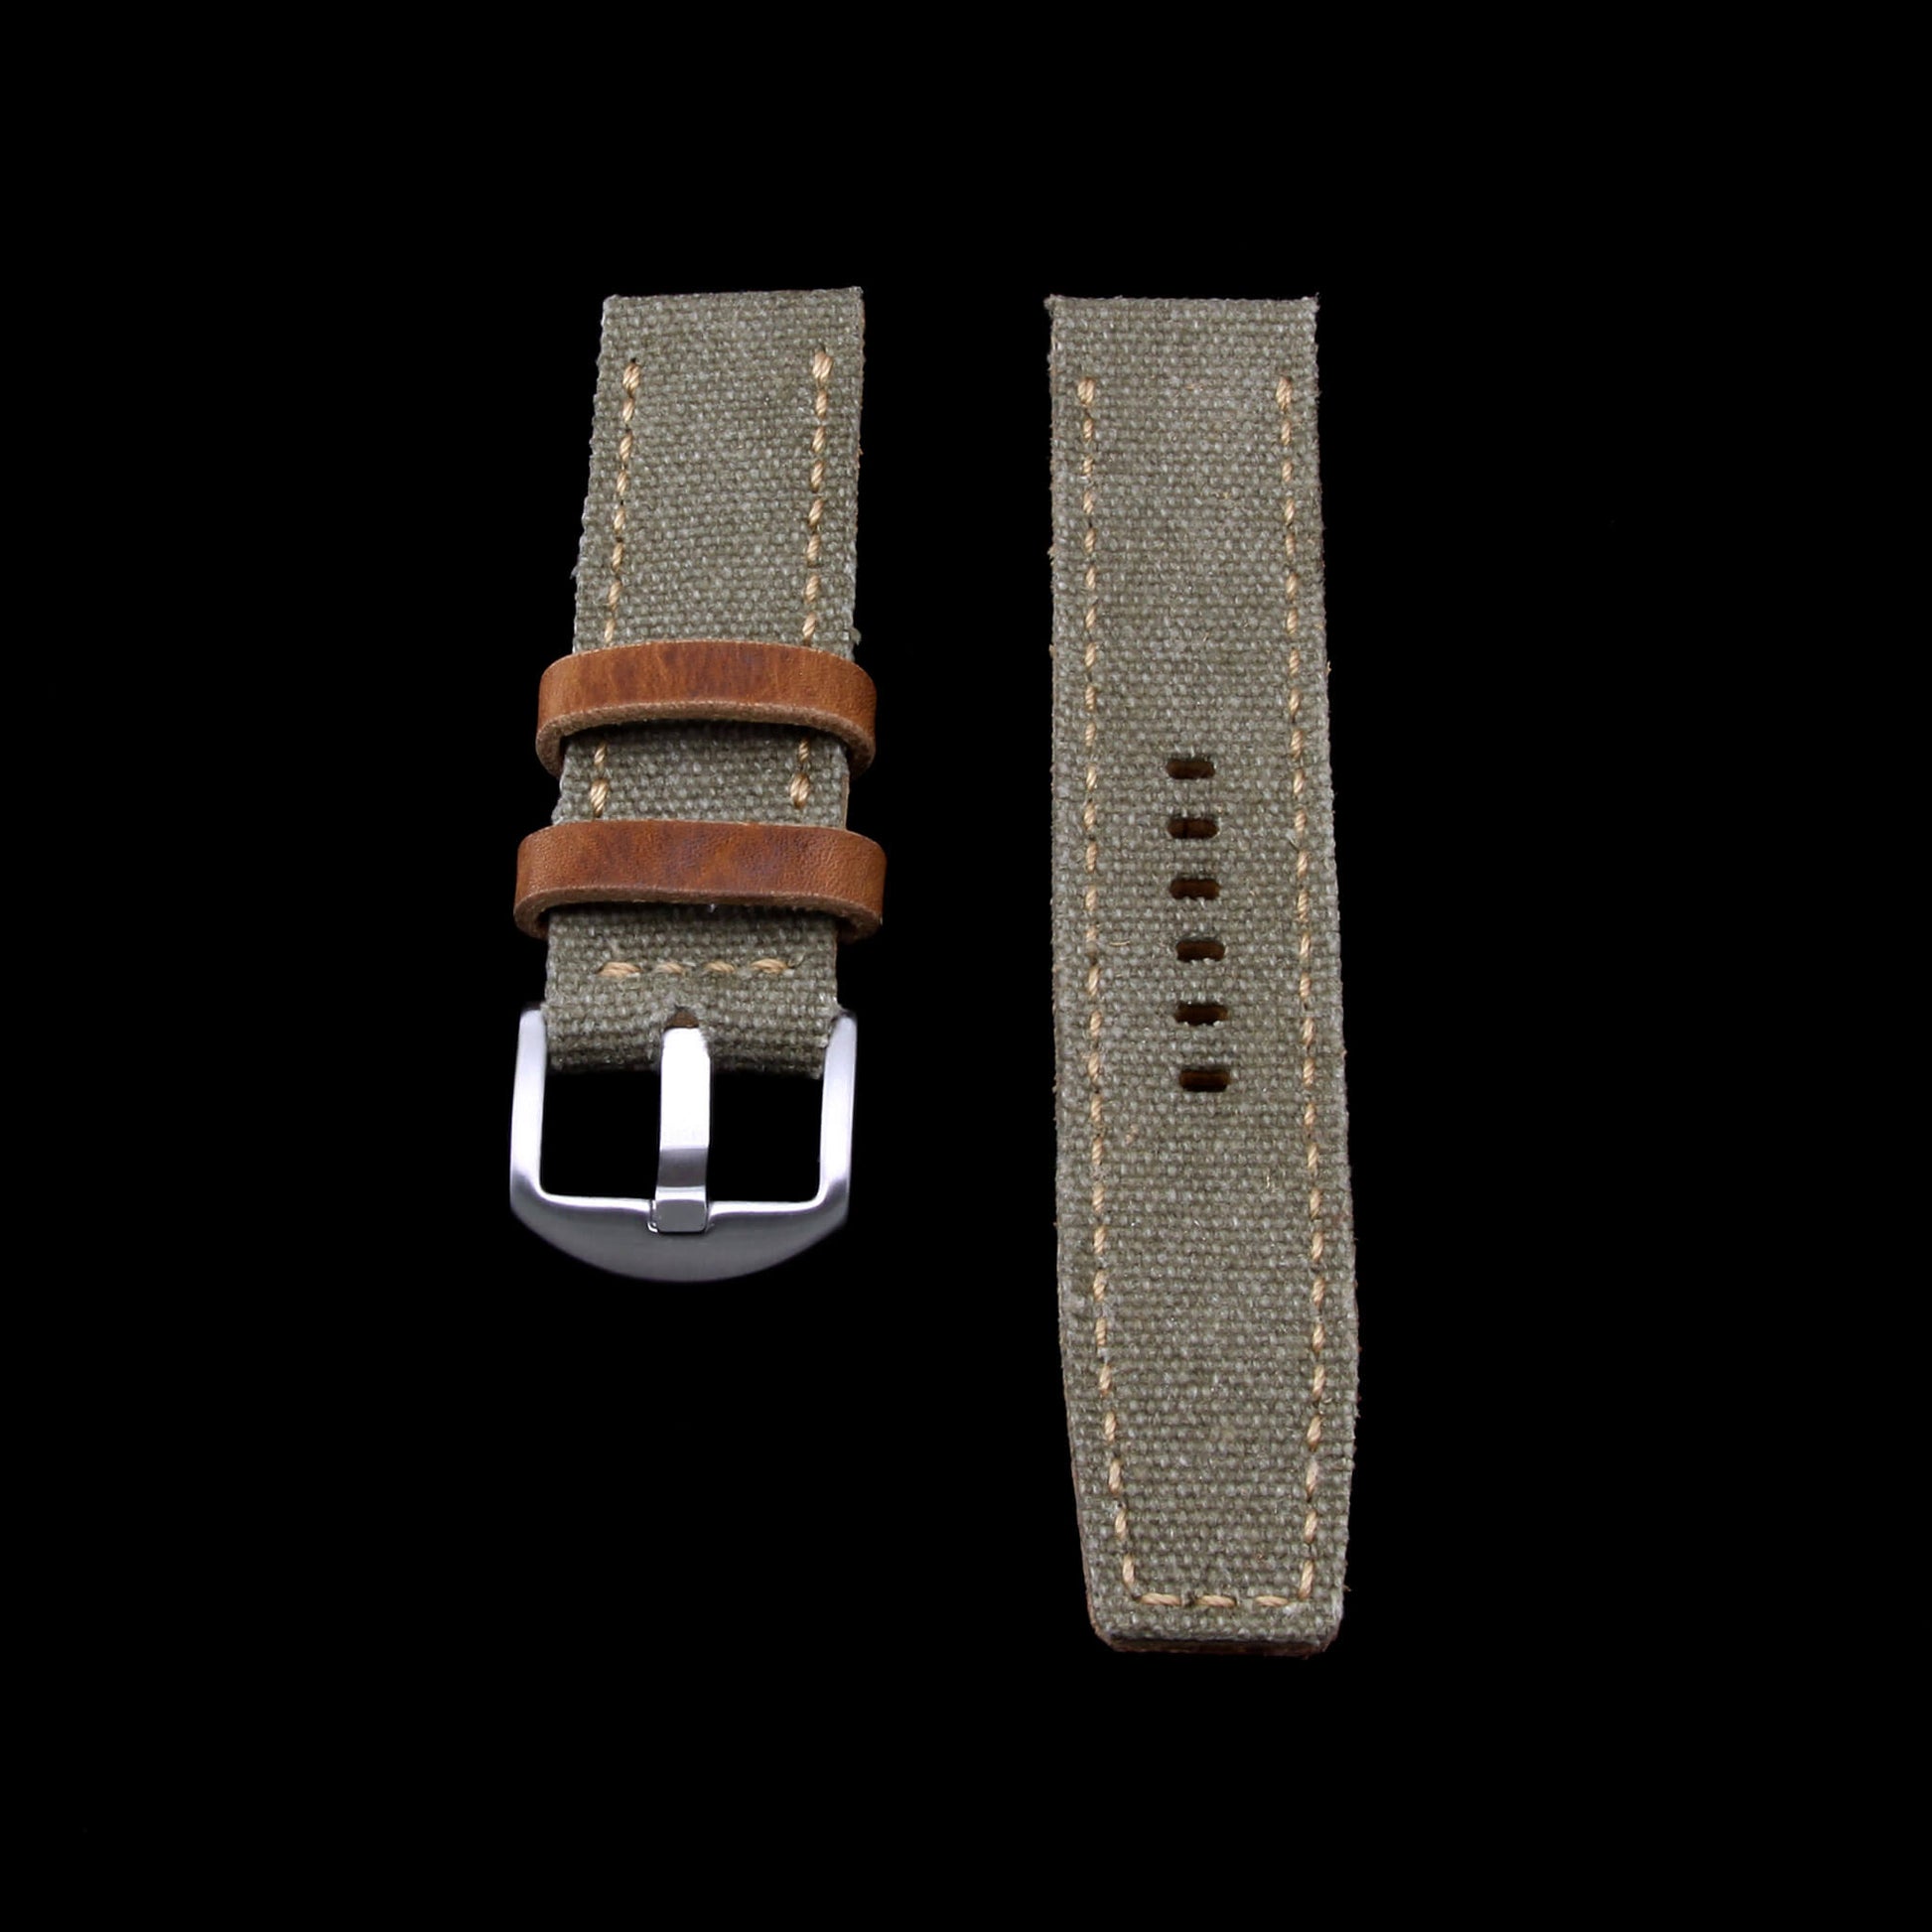 2nd View of 2-Piece Full Stitch Leather Watch Strap, made with Military Green Canvas and Italian veg-tanned leather lining, handcrafted by Cozy Handmade